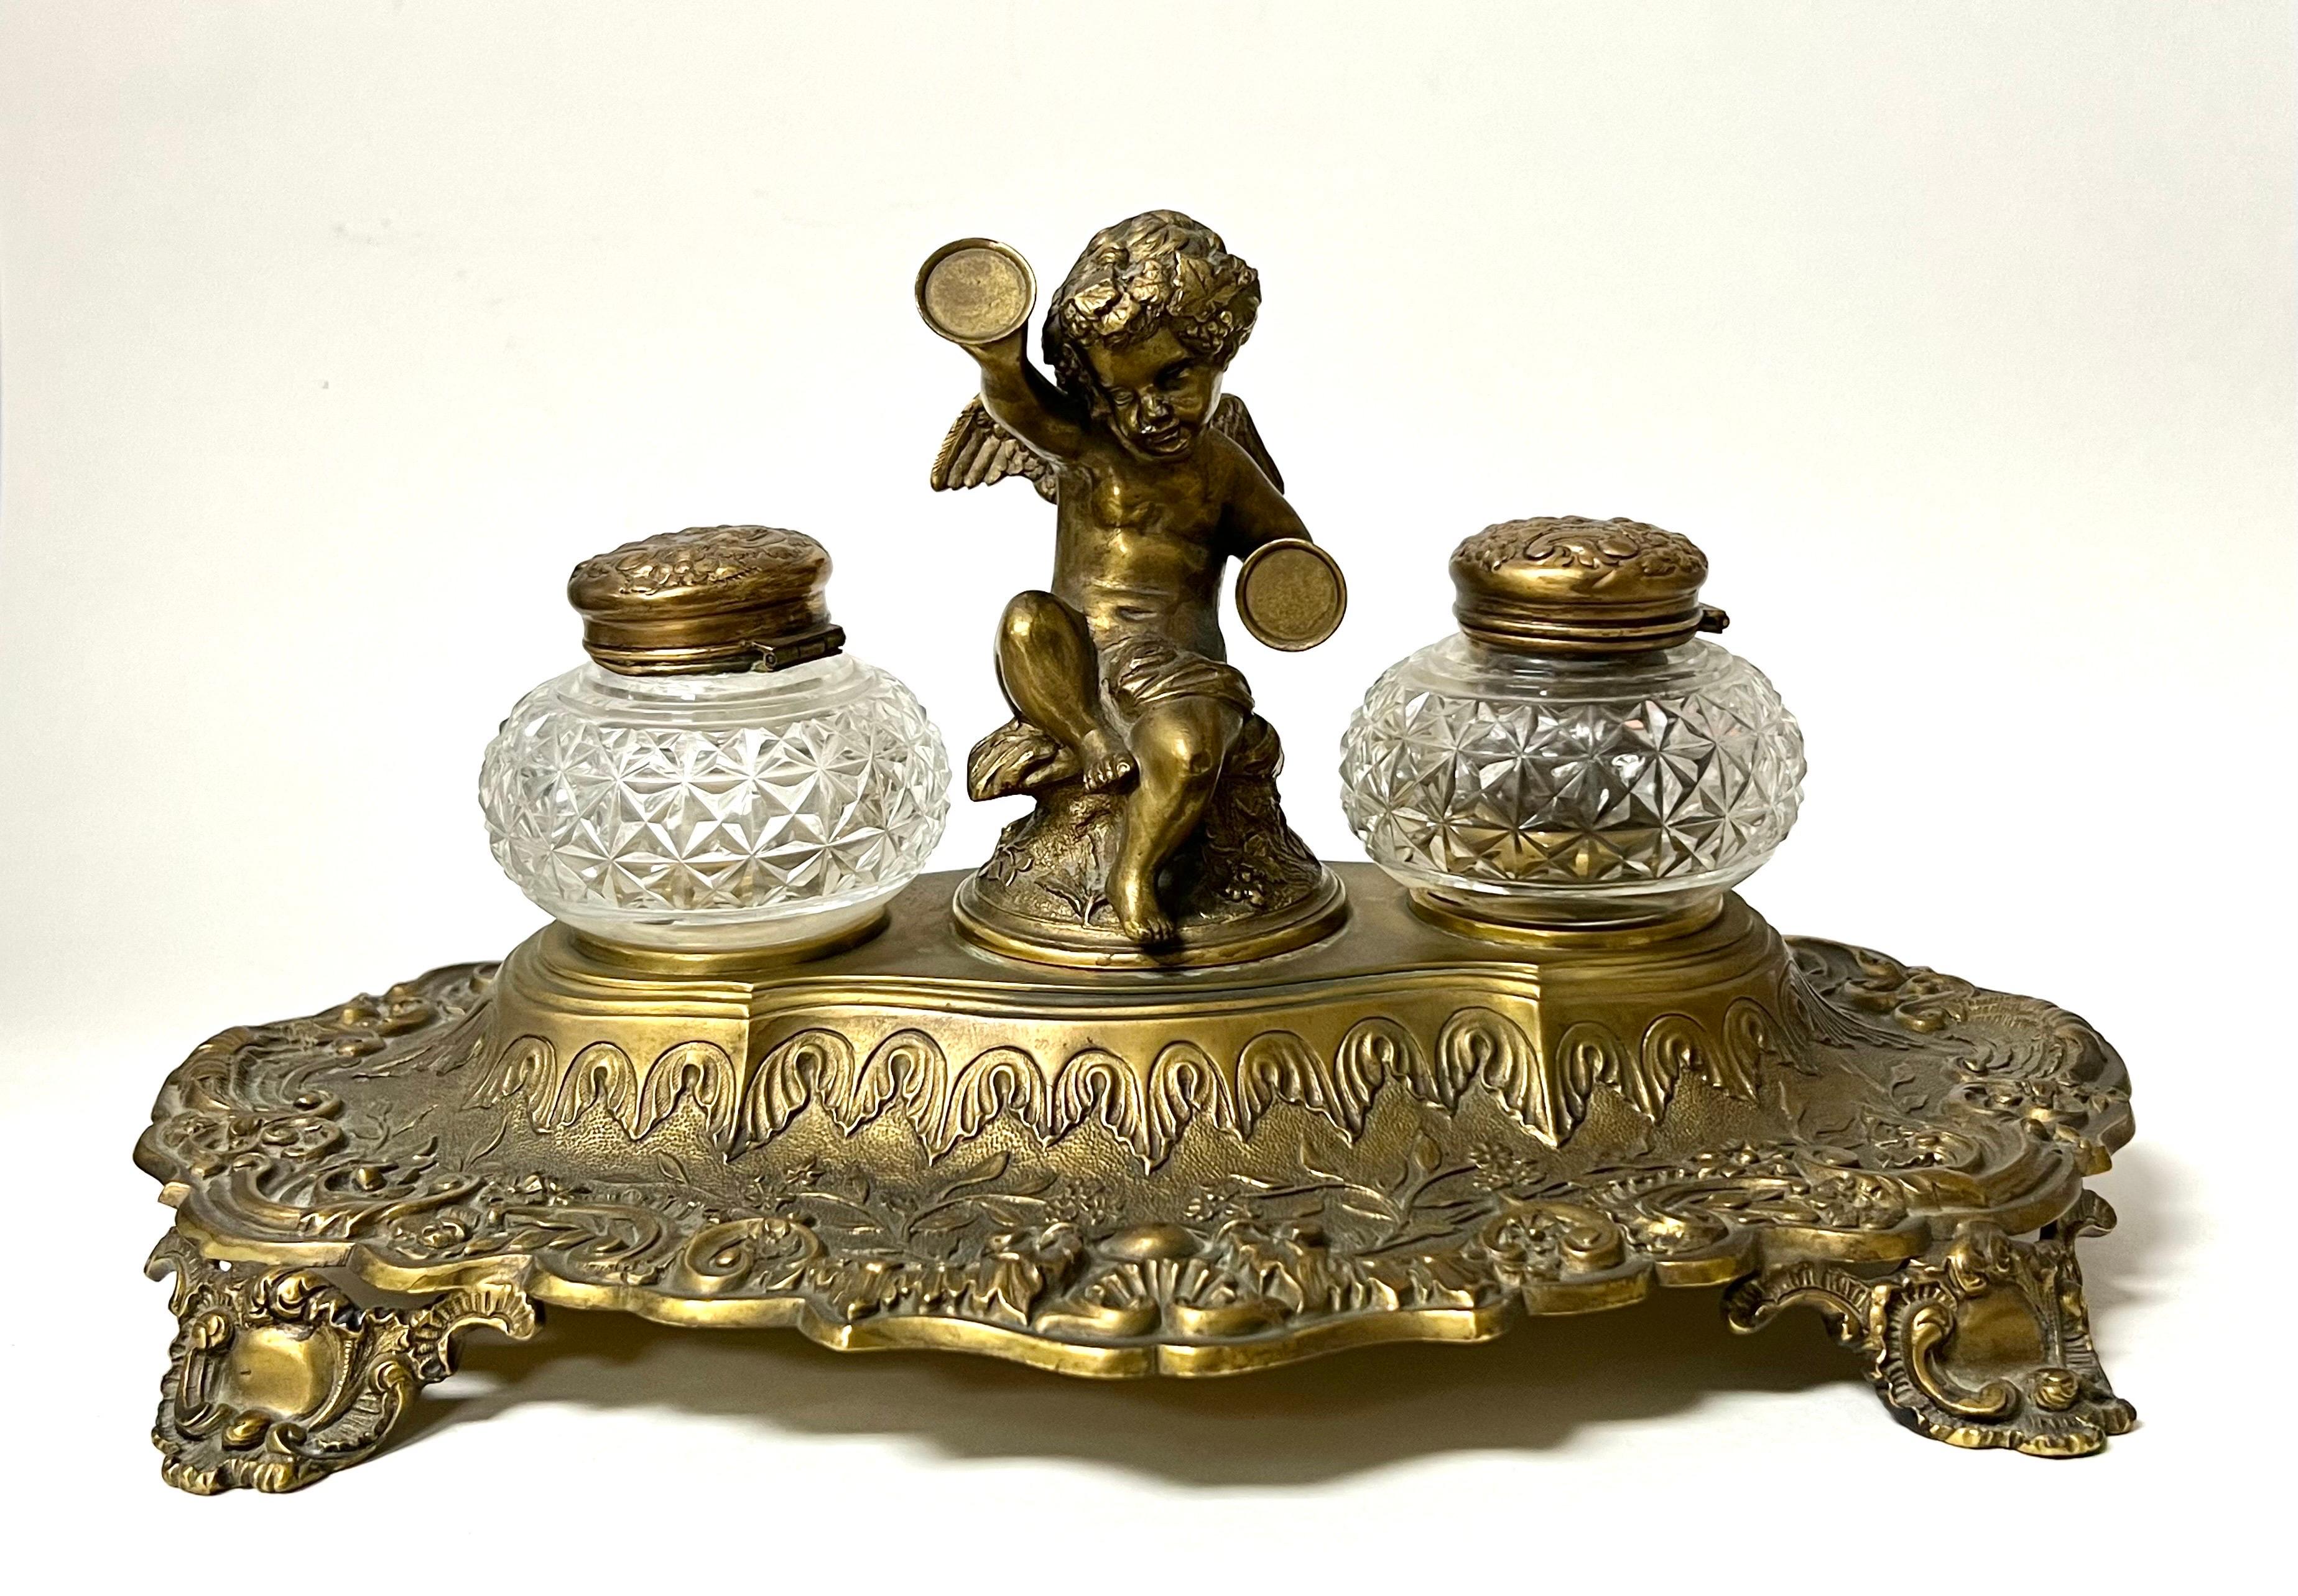 Inkwell with cherub and crystal wells. Brass, most likely originally silver plated. In great condition otherwise. Quite decorative and collectible.